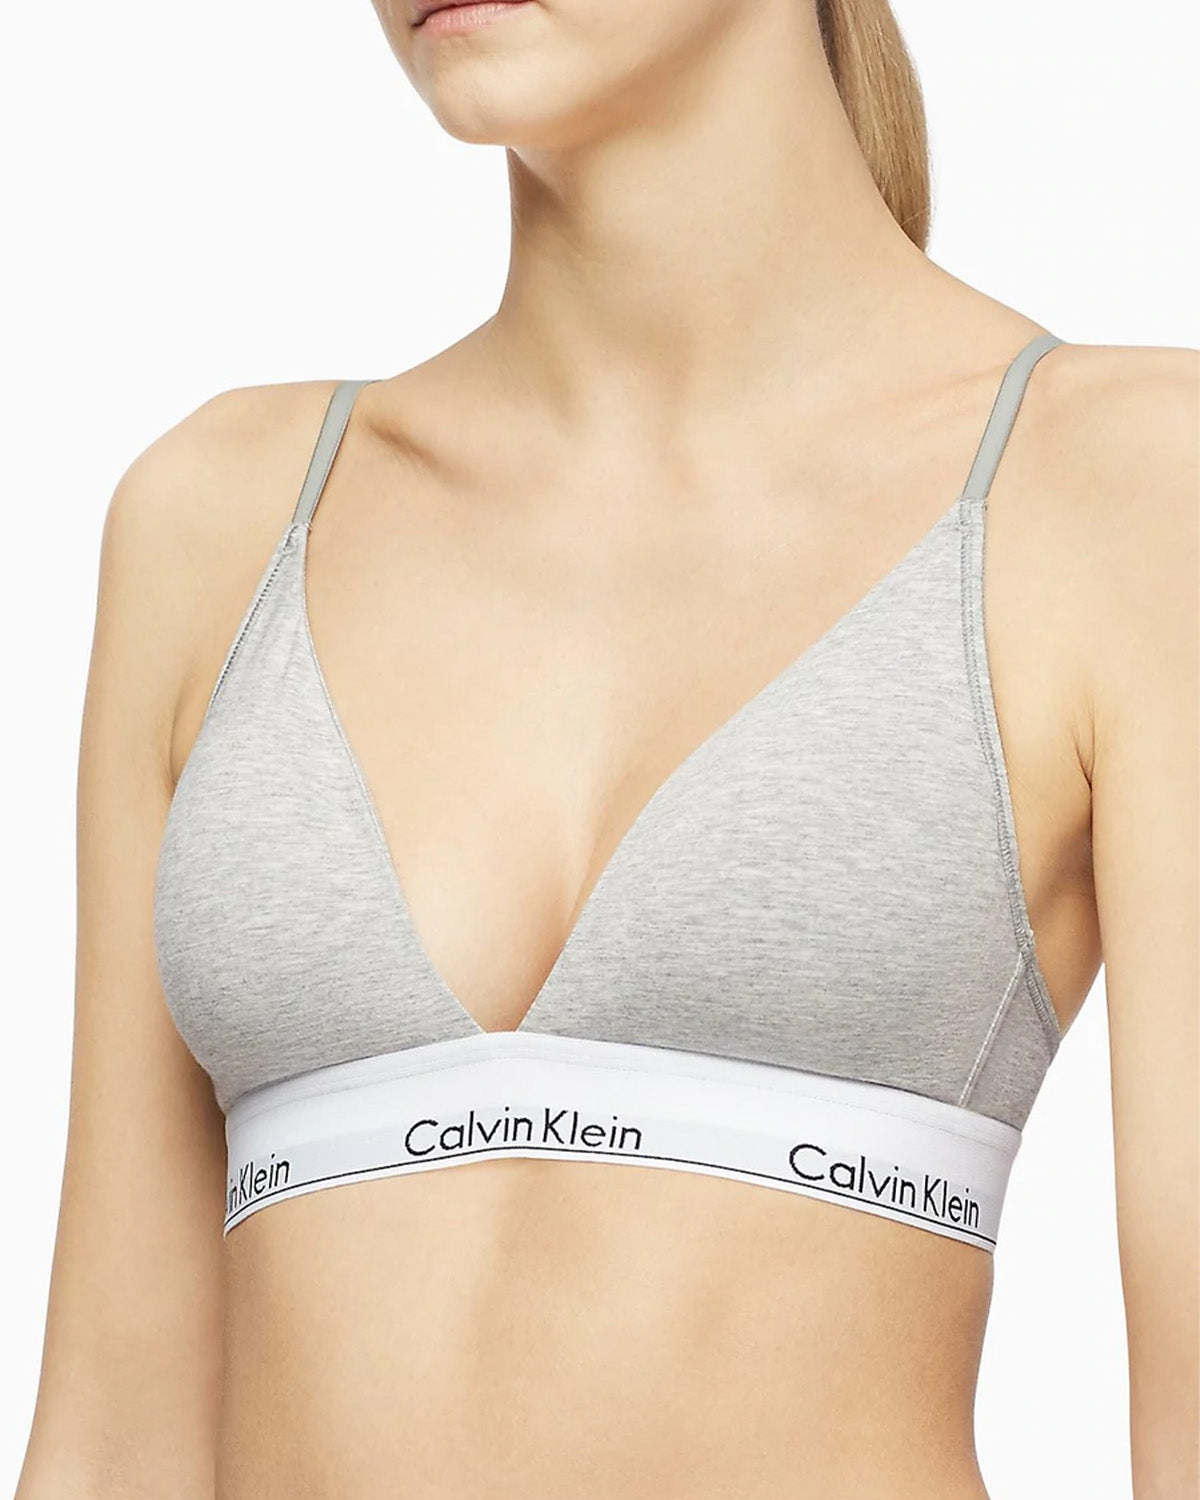 Calvin Klein One Cotton Triangle Bralette  Urban Outfitters Australia  Official Site